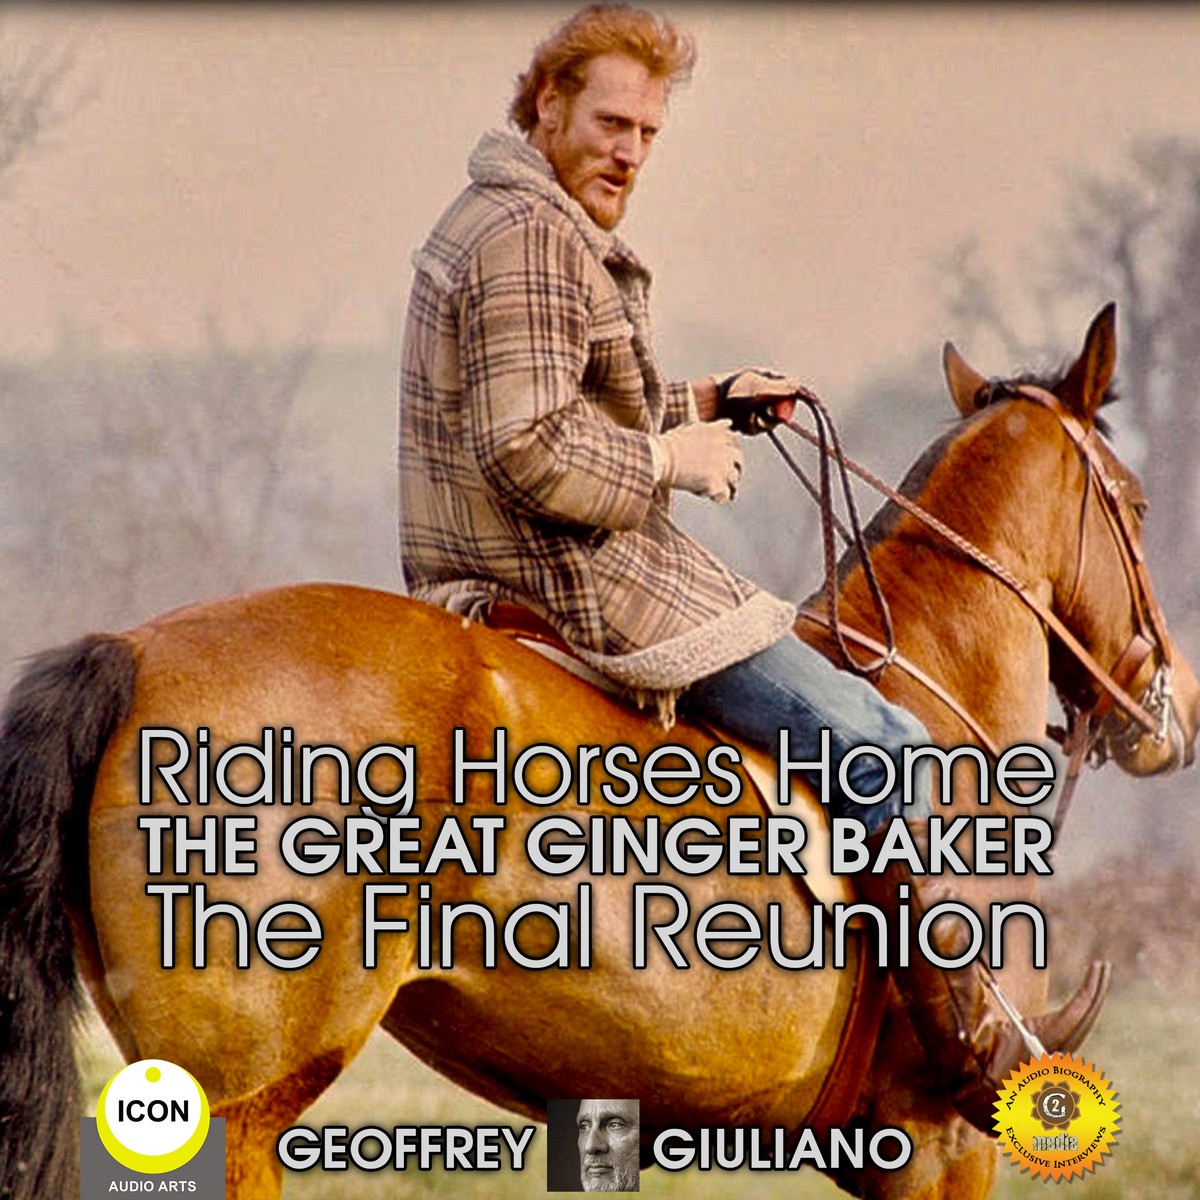 Riding Horses Home The Great Ginger Baker – The Final Reunion